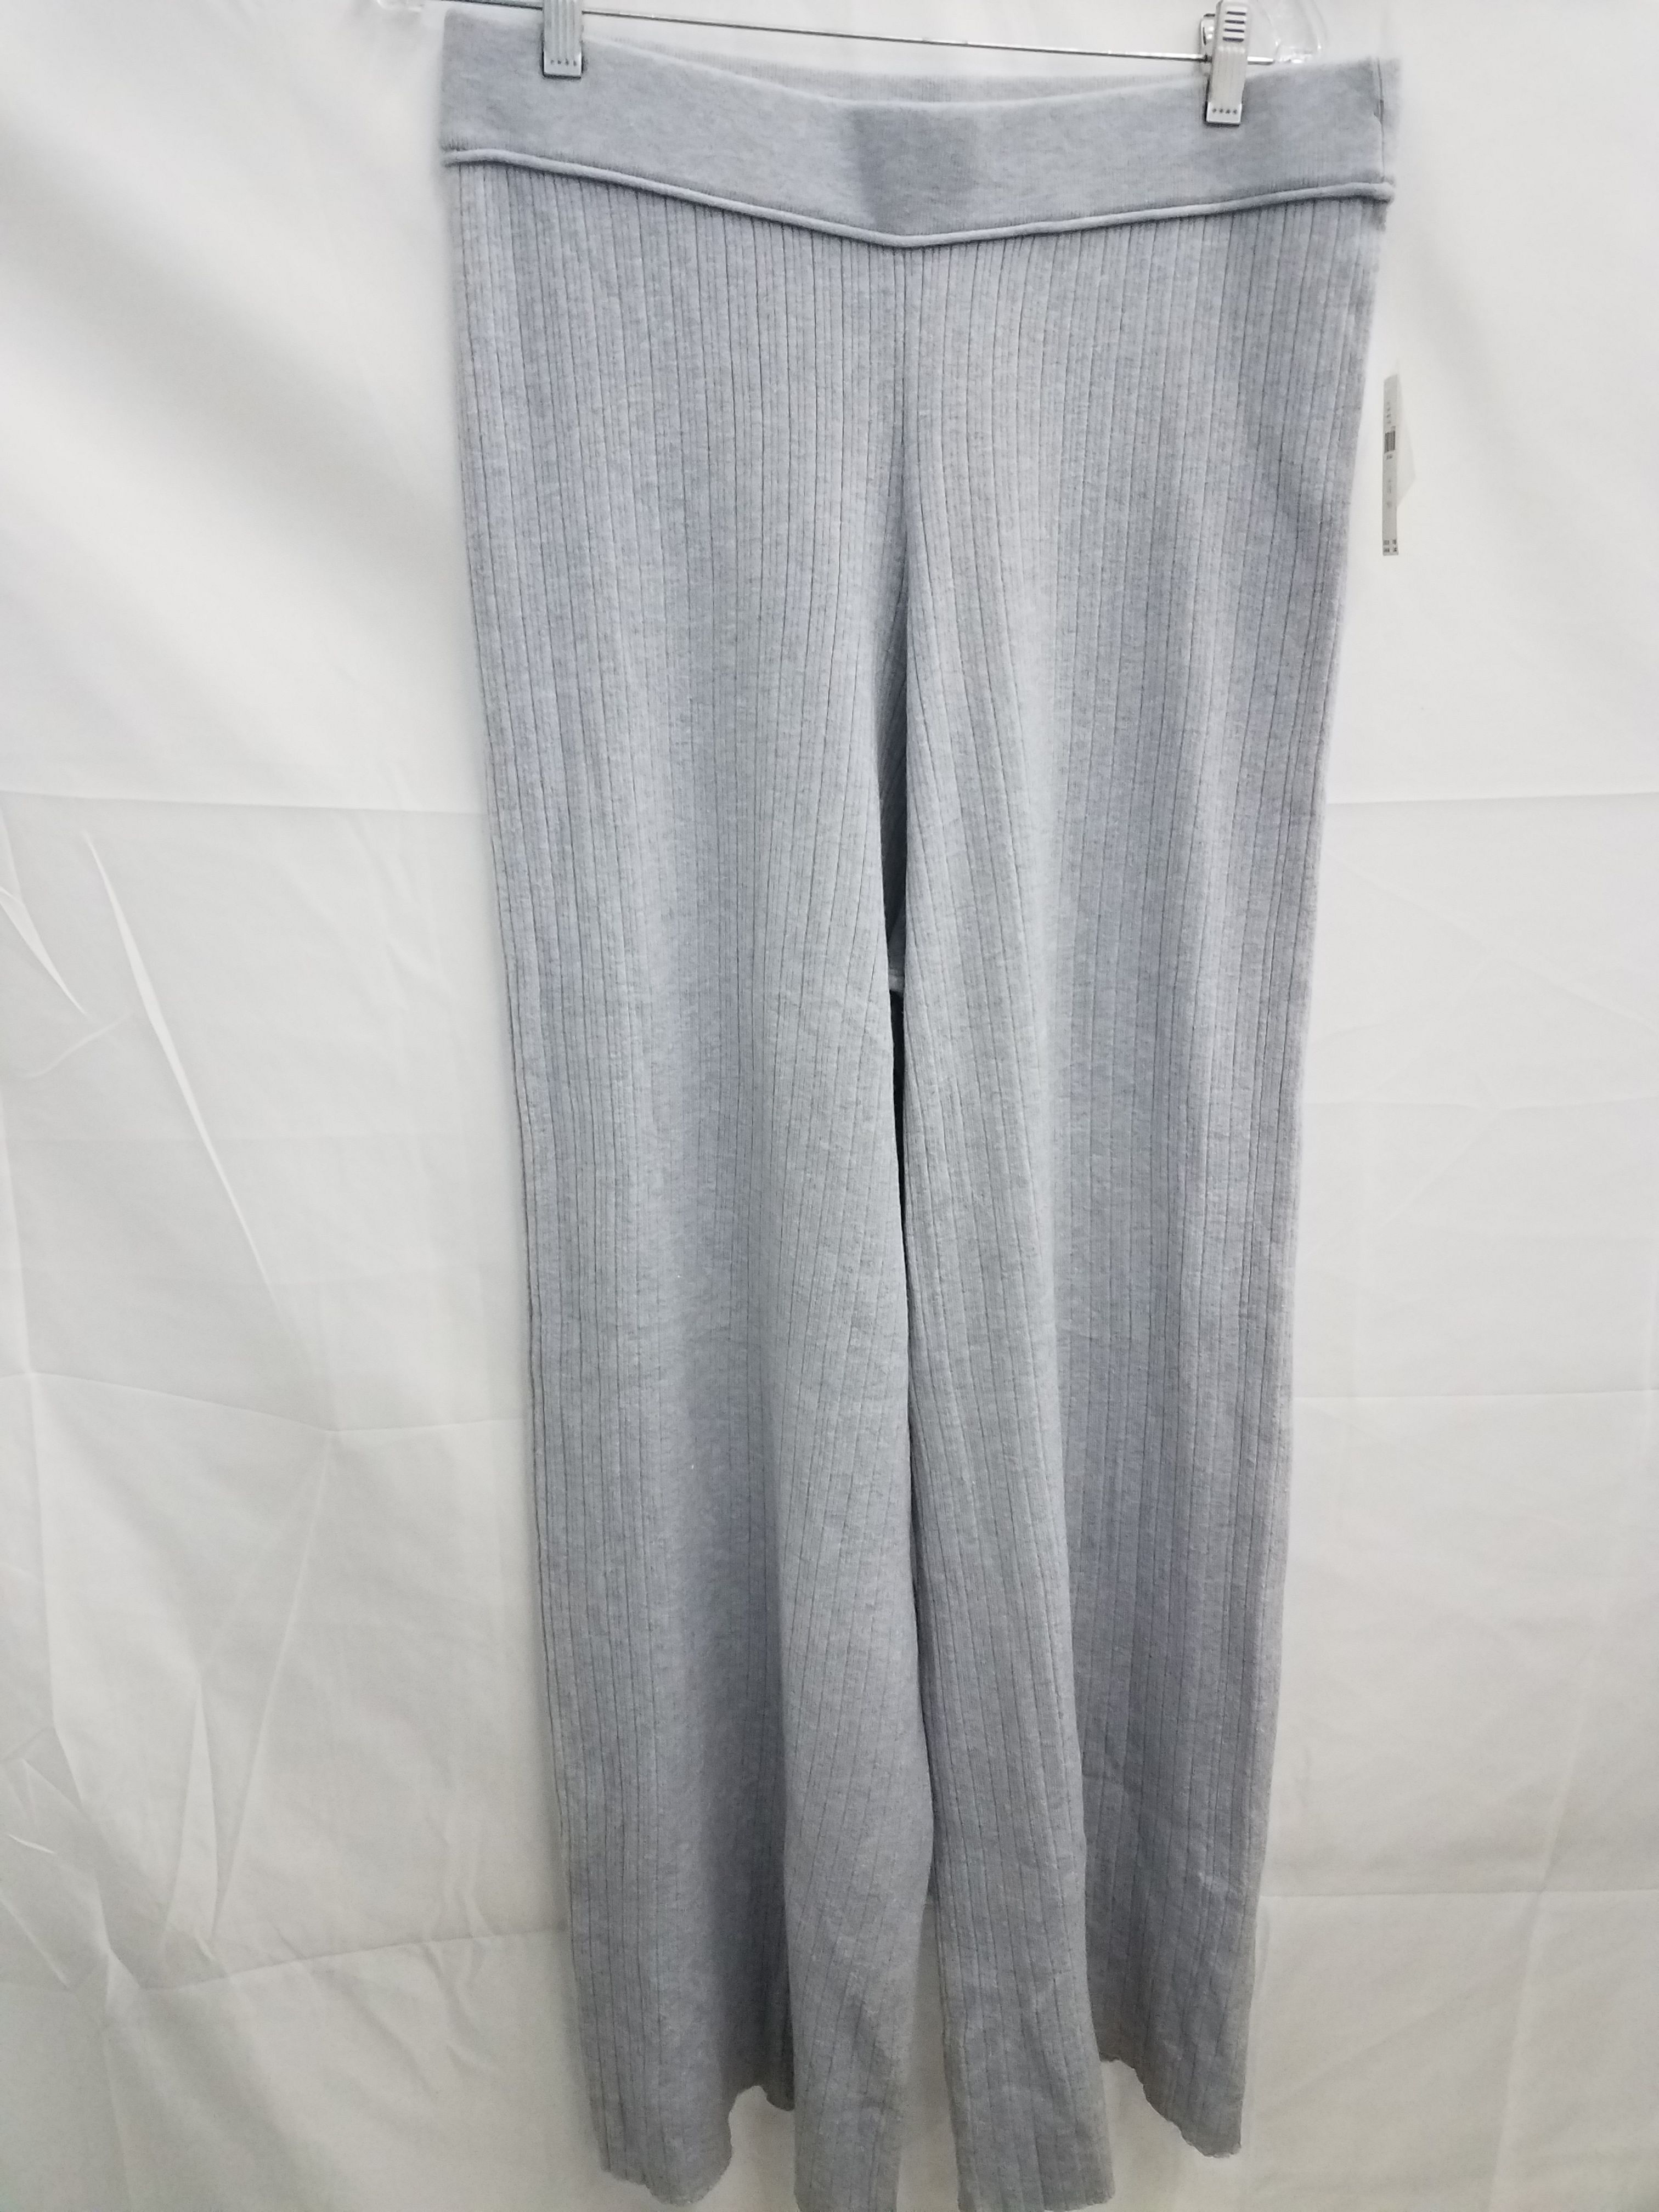 Buy the Daily Practice by Anthropologie Women's Gray Lounge Pants SZ 1X NWT